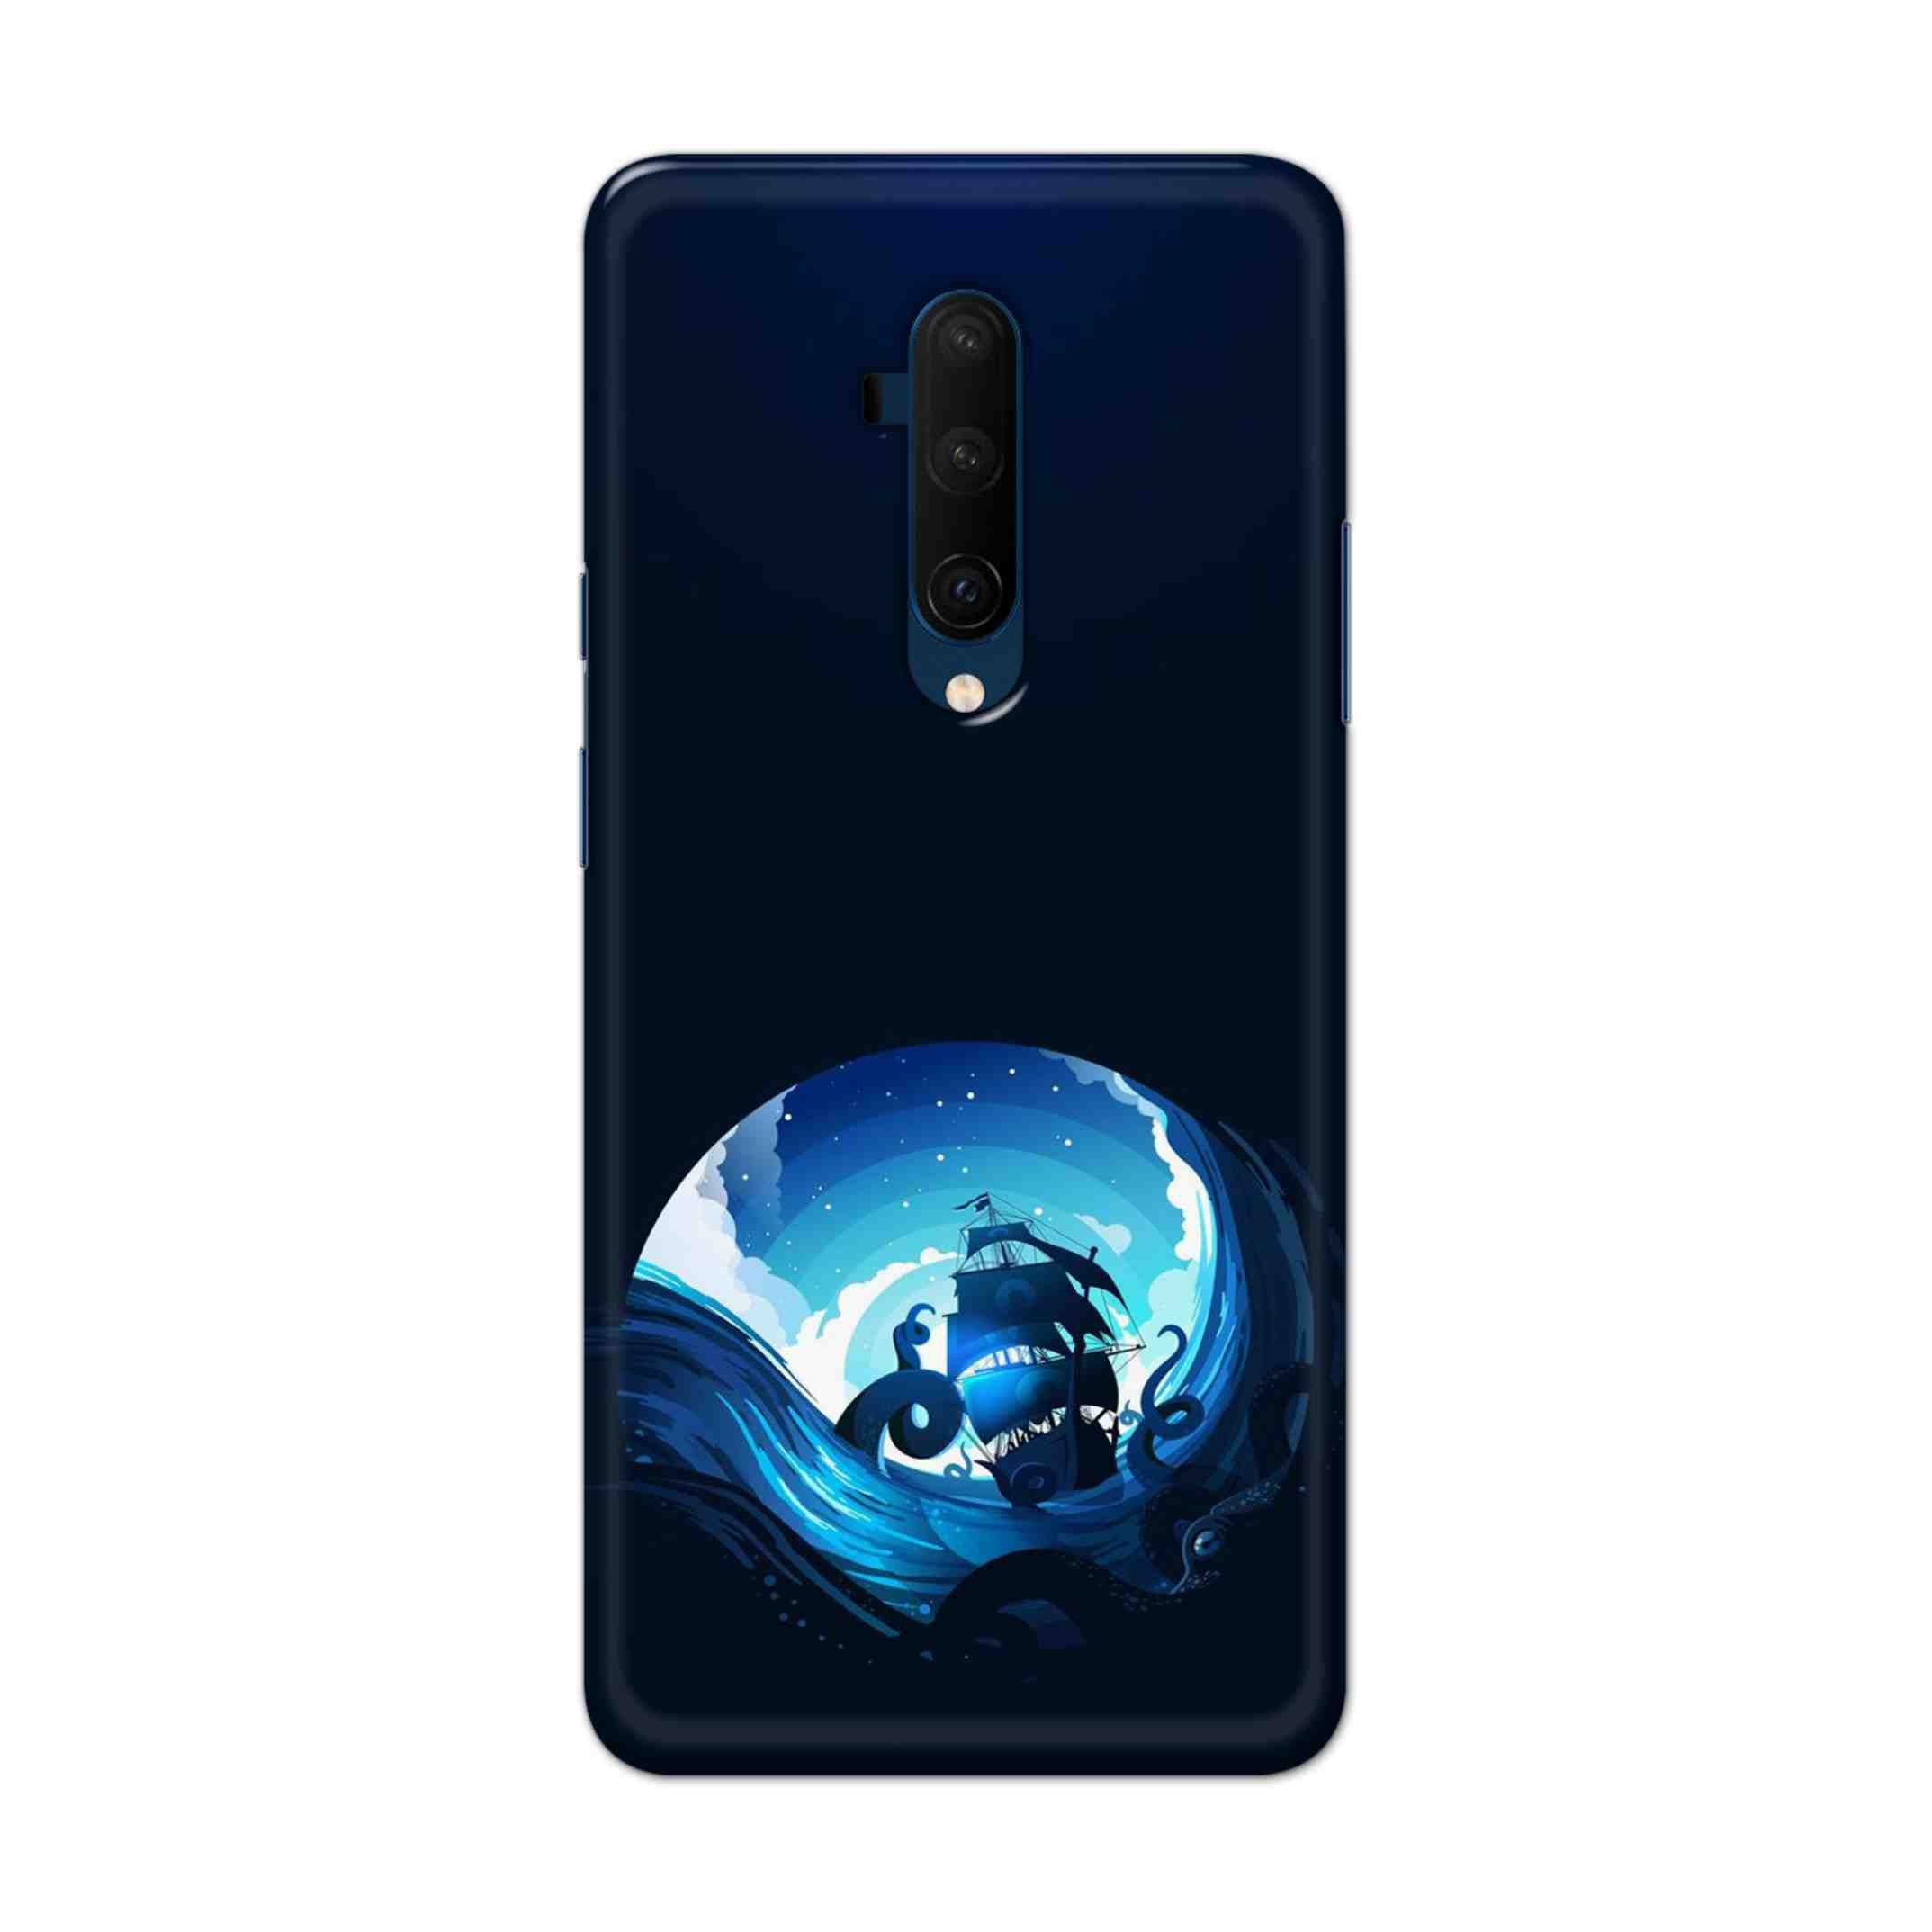 Buy Blue Sea Ship Hard Back Mobile Phone Case Cover For OnePlus 7T Pro Online